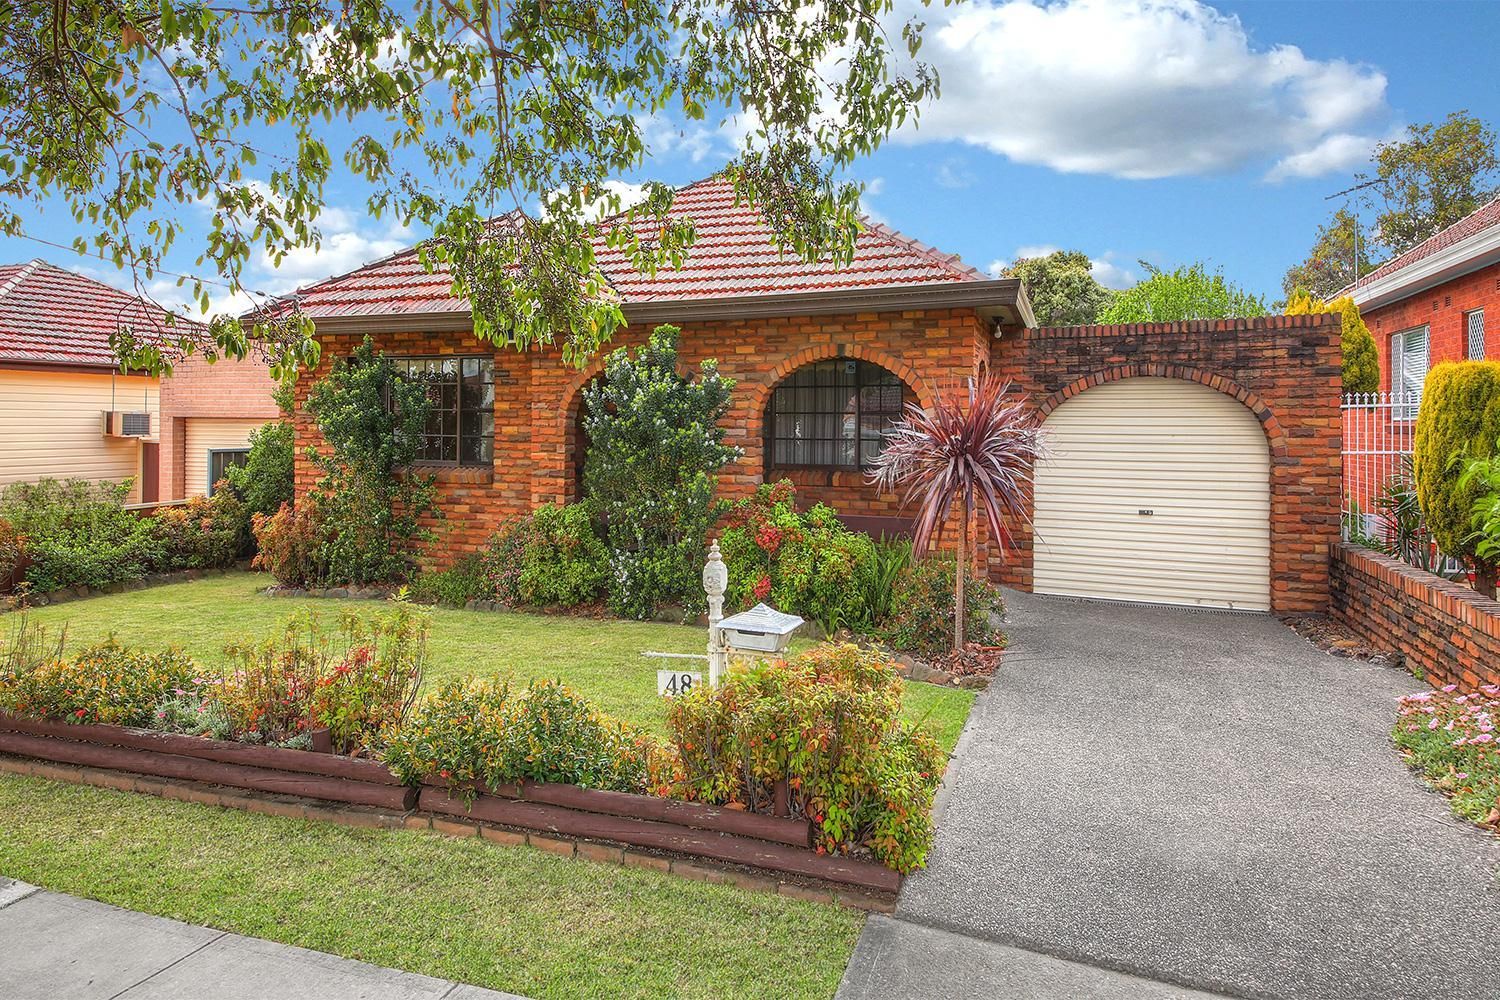 48 Bent Street, Chester Hill NSW 2162, Image 0